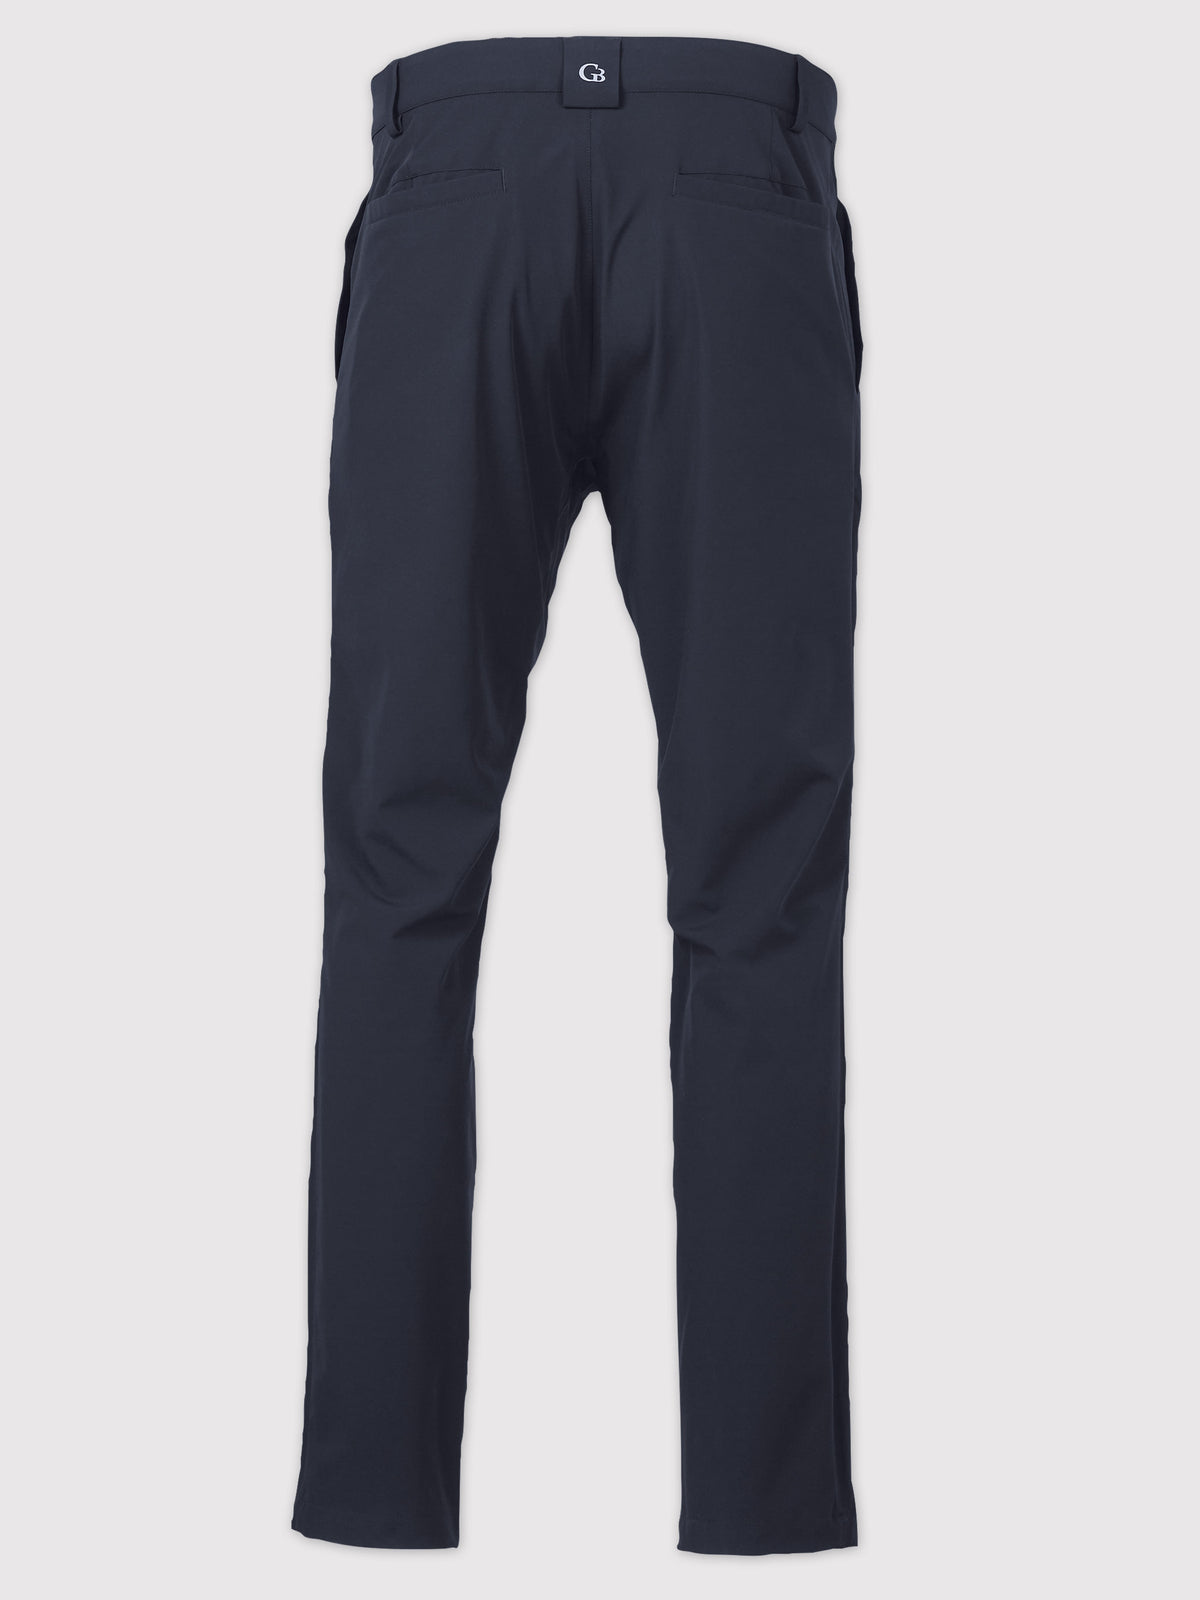 The back of Slate blue All-Weather Chino